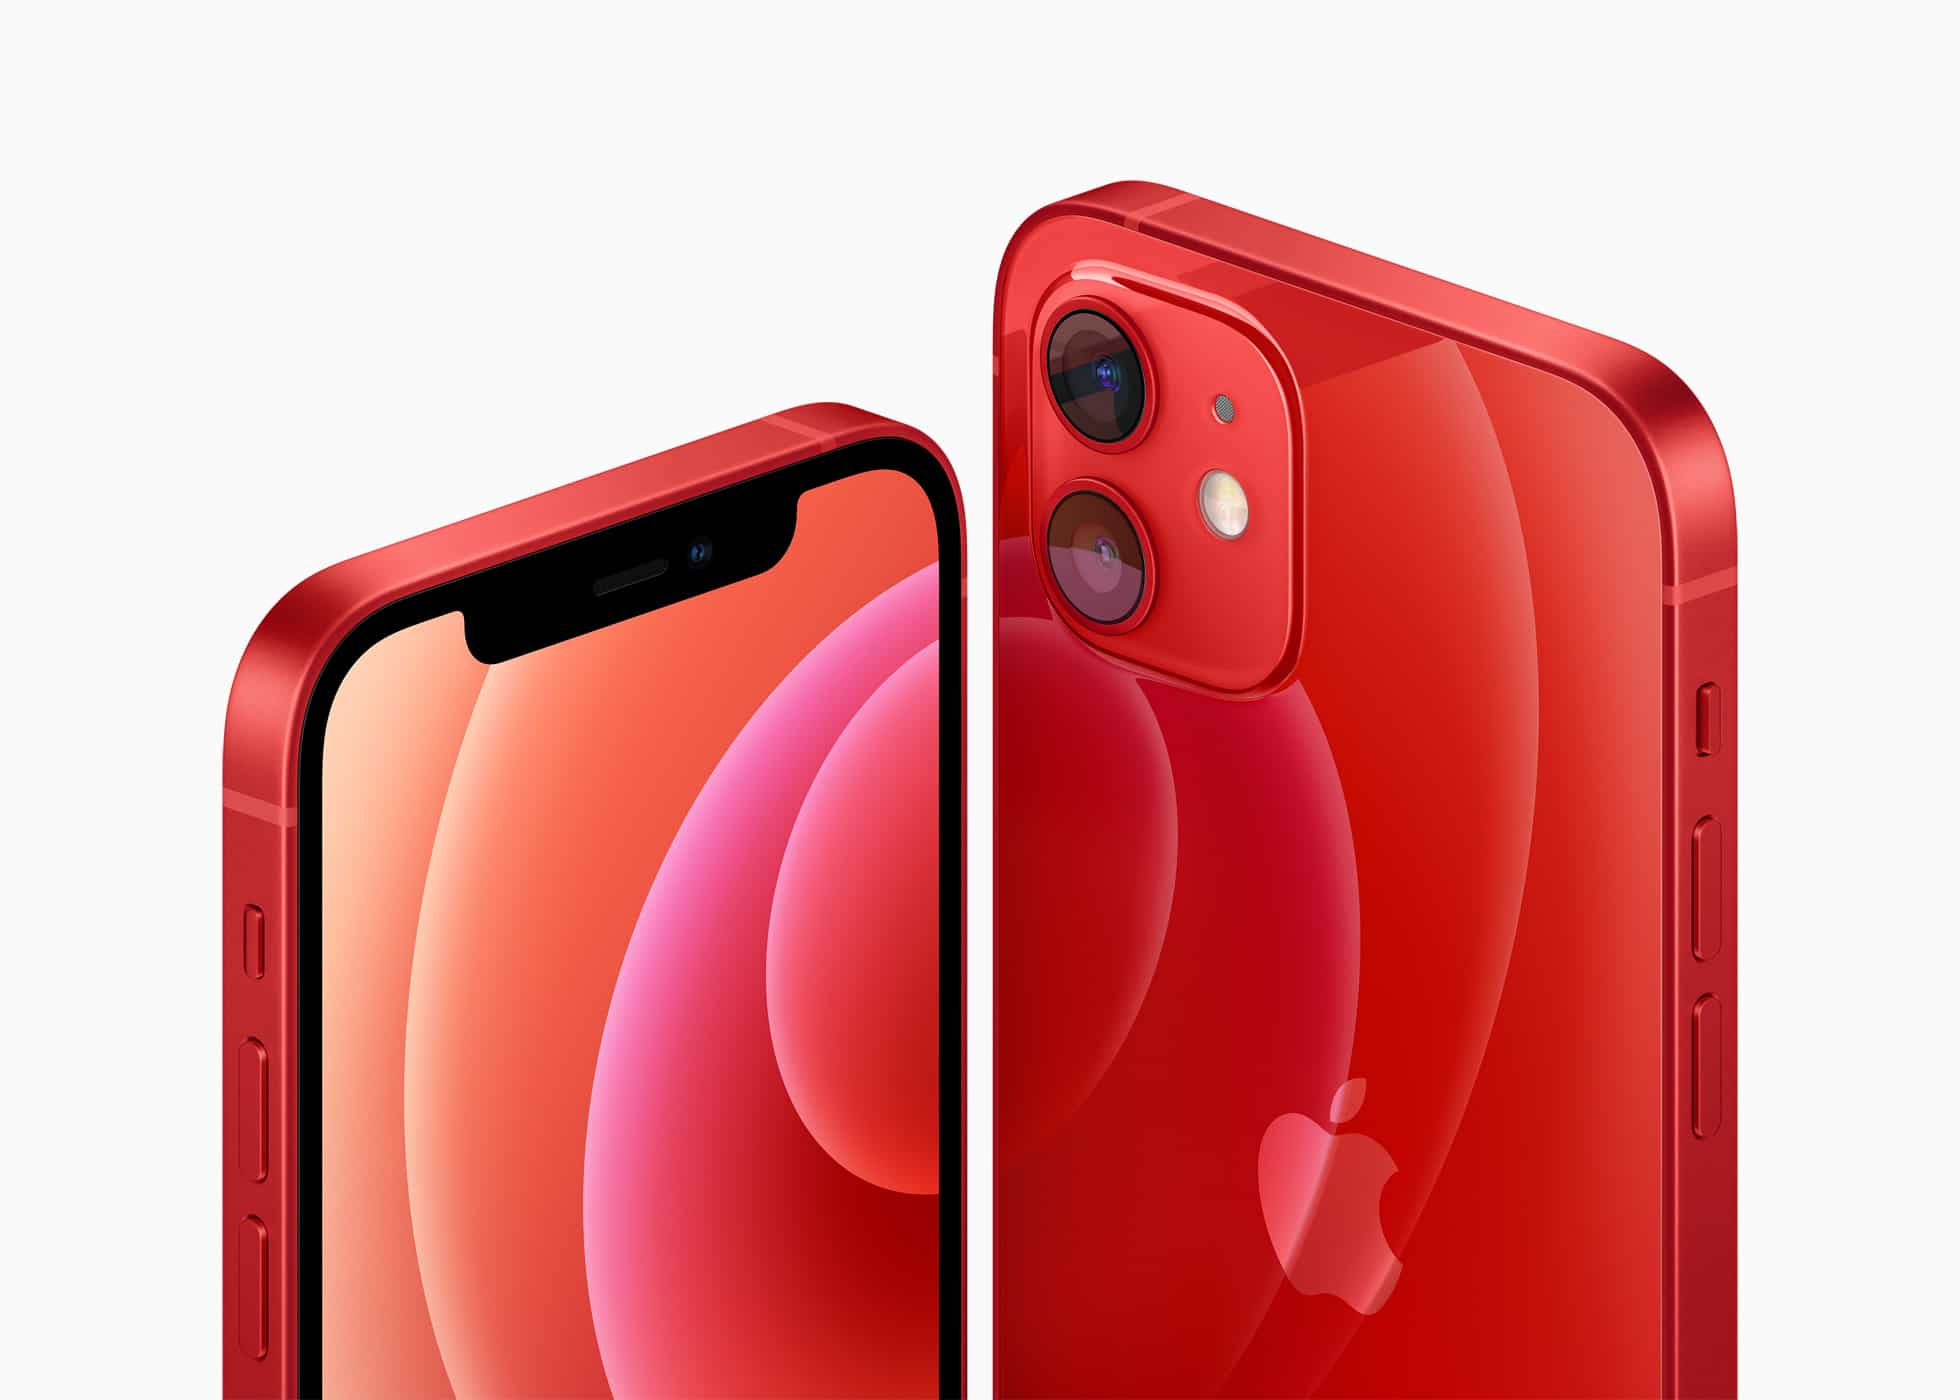 apple_iphone-12_color-red_10132020